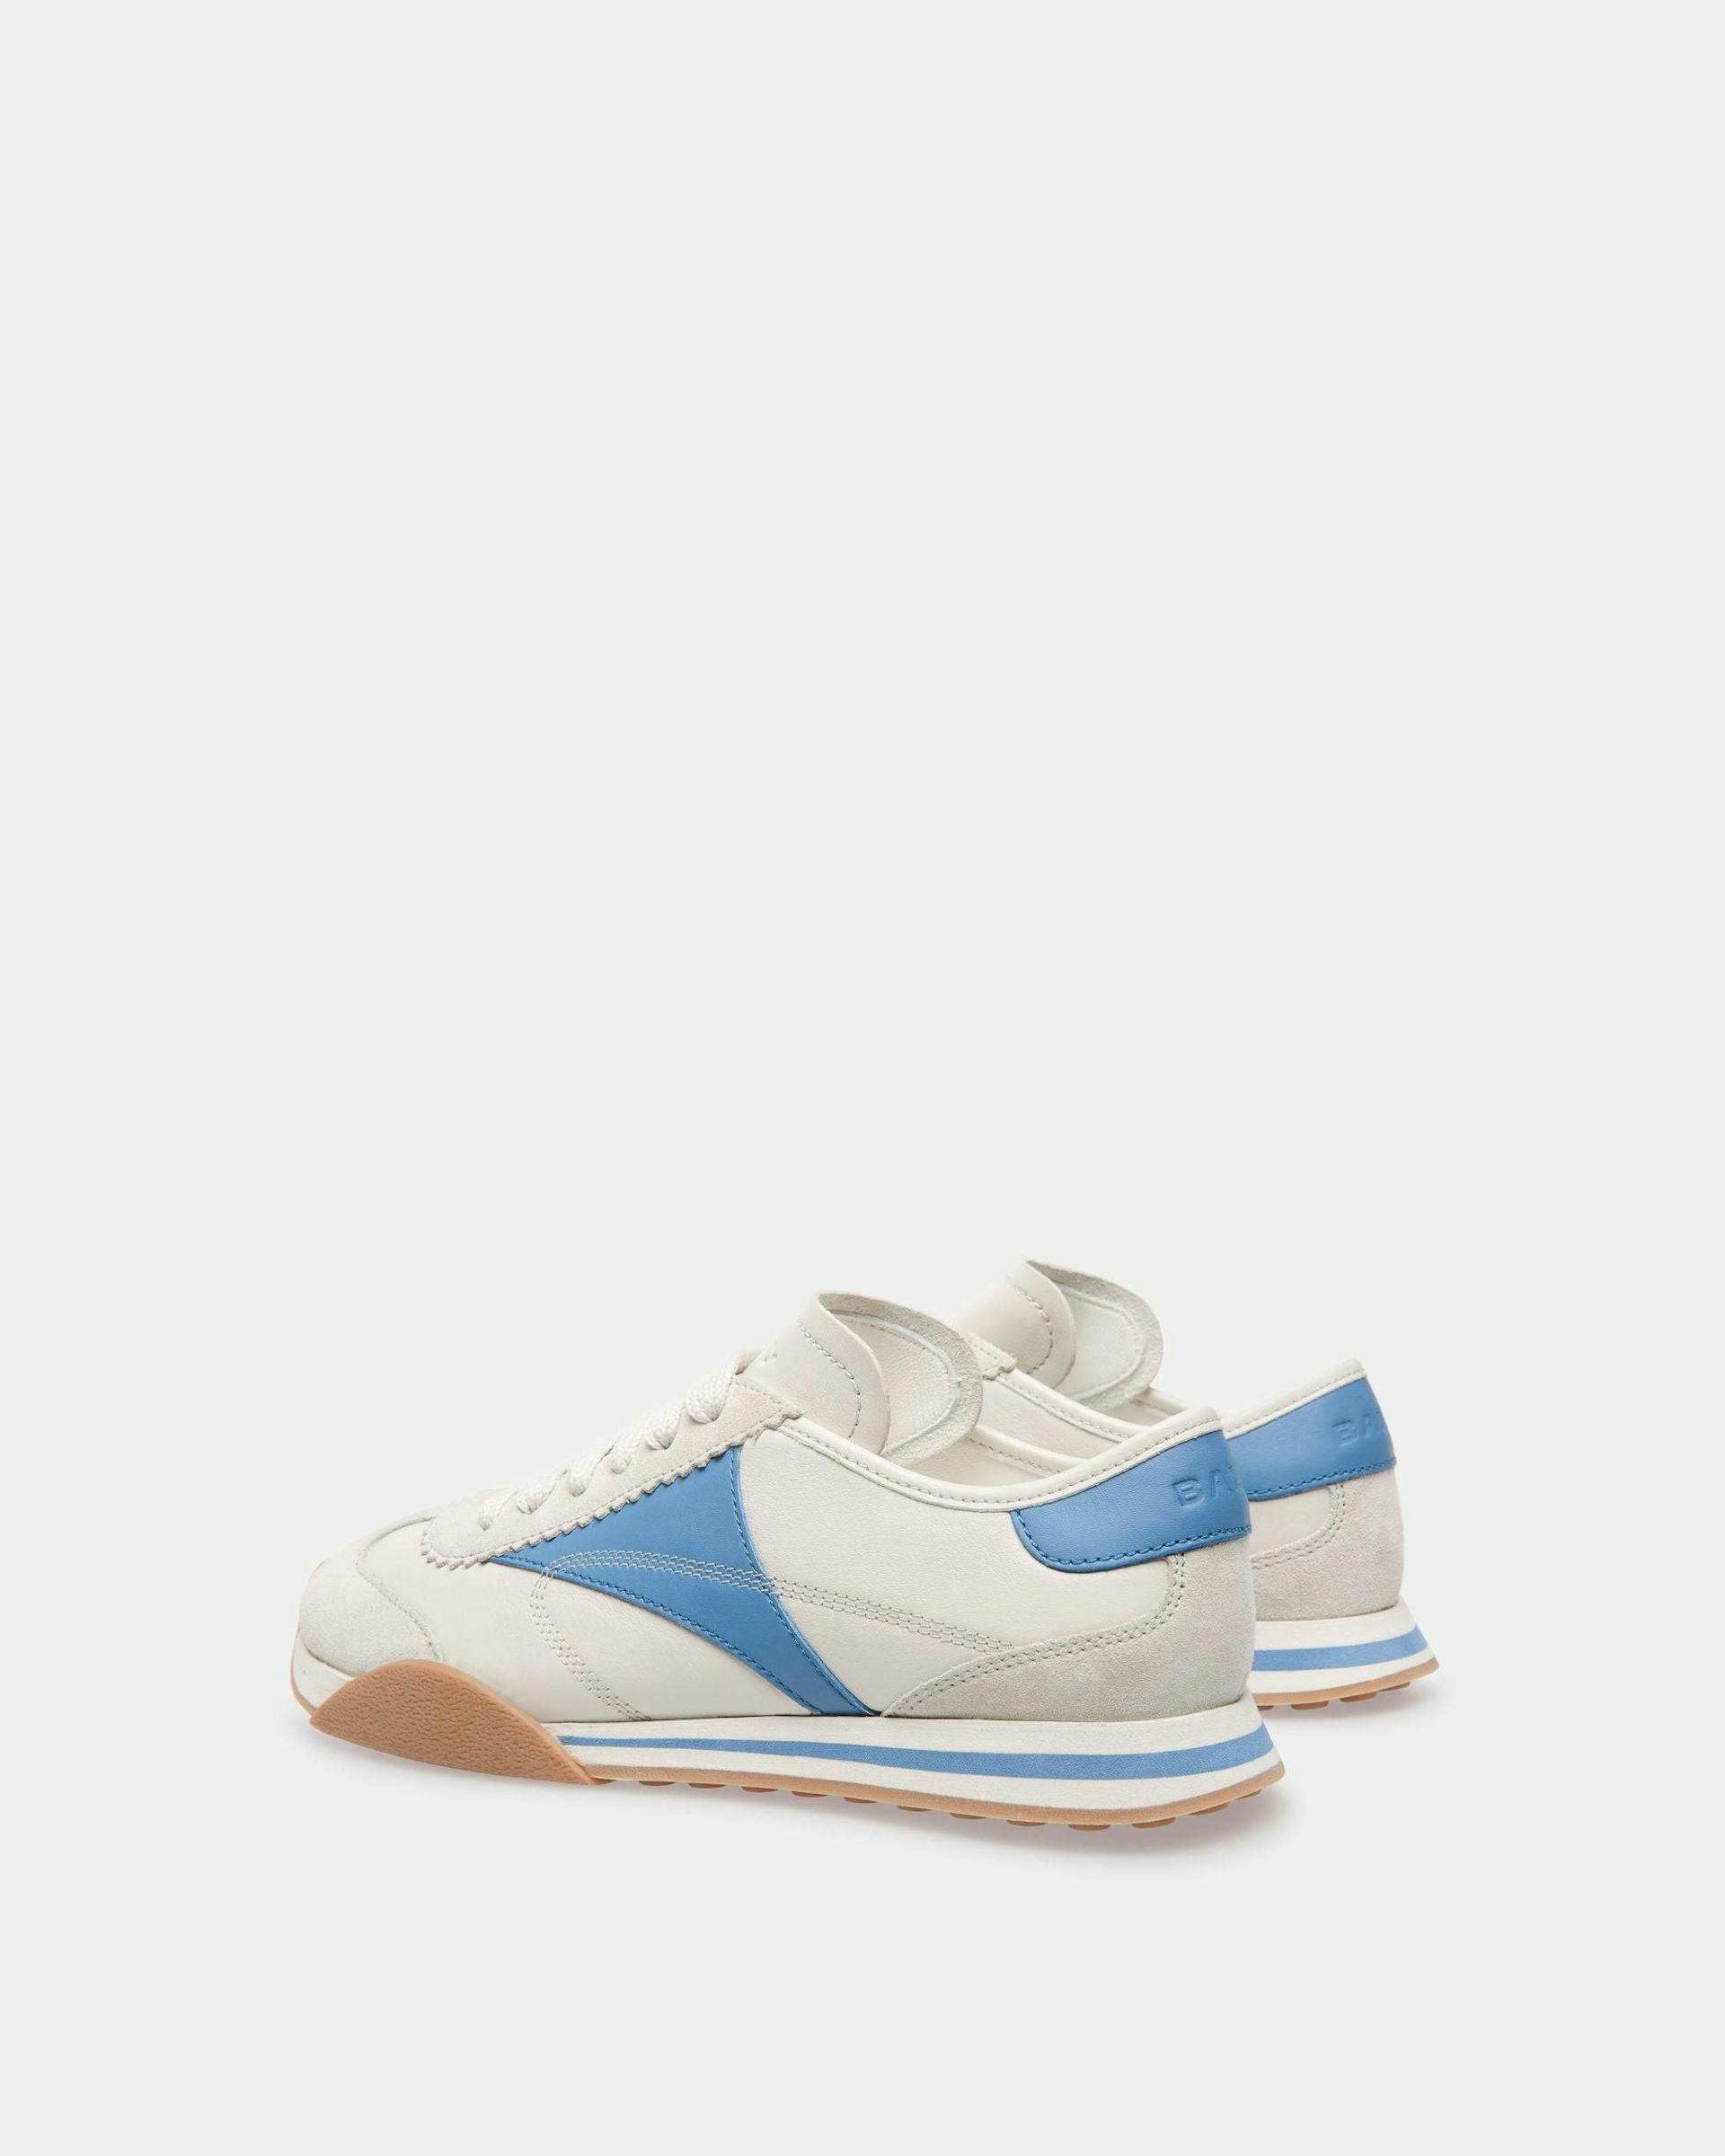 Sussex Sneakers In Dusty White And Blue Leather - Women's - Bally - 03